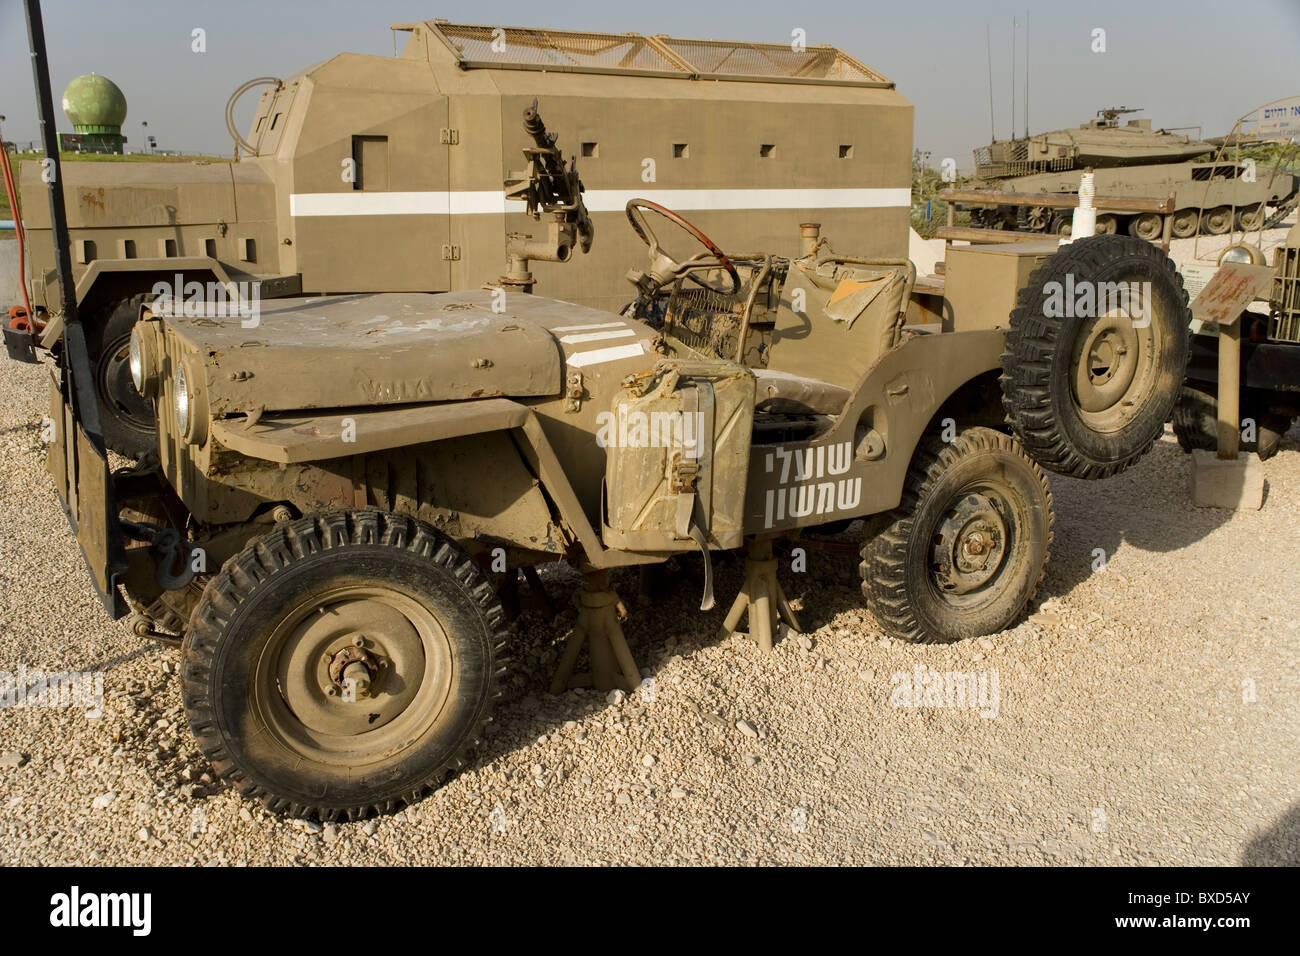 Jeep used by the 9th Battalion,Palmach Brigade Negev Brigade in the War of Independence Israeli Armored Corps Museum, Latrun Stock Photo